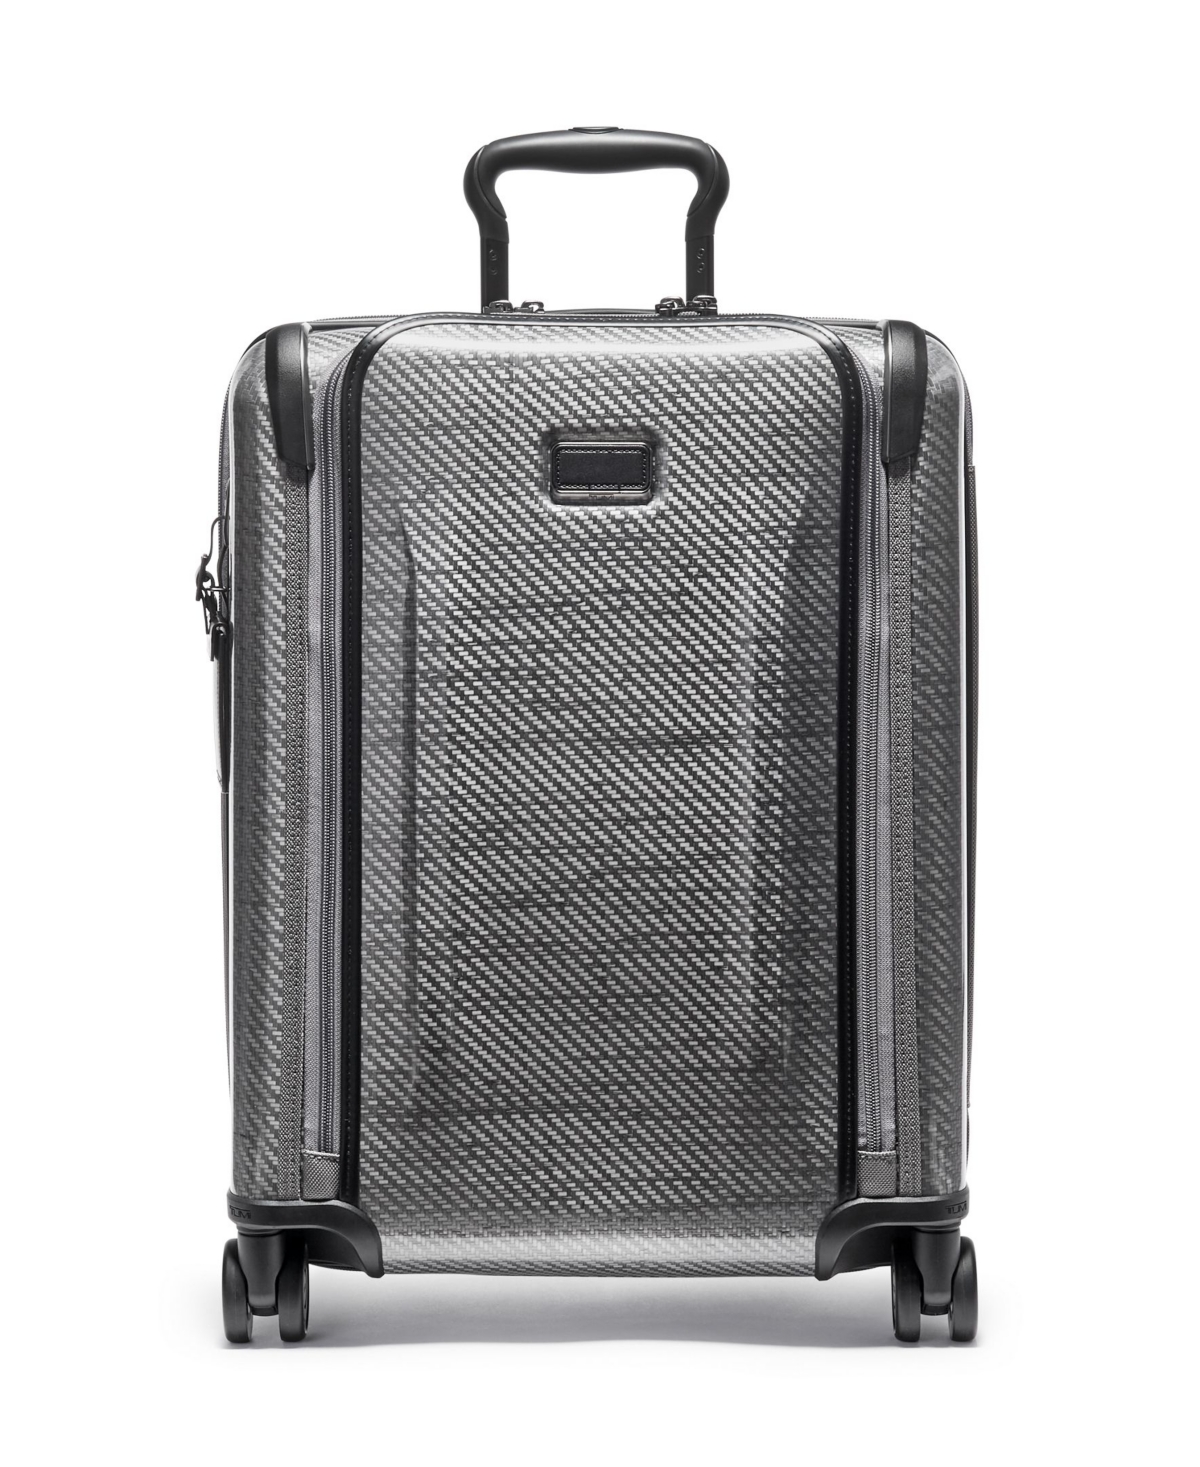 TUMI TEGRA LITE 21.75" CONTINENTAL FRONT POCKET EXPANDABLE CARRY-ON SUITCASE